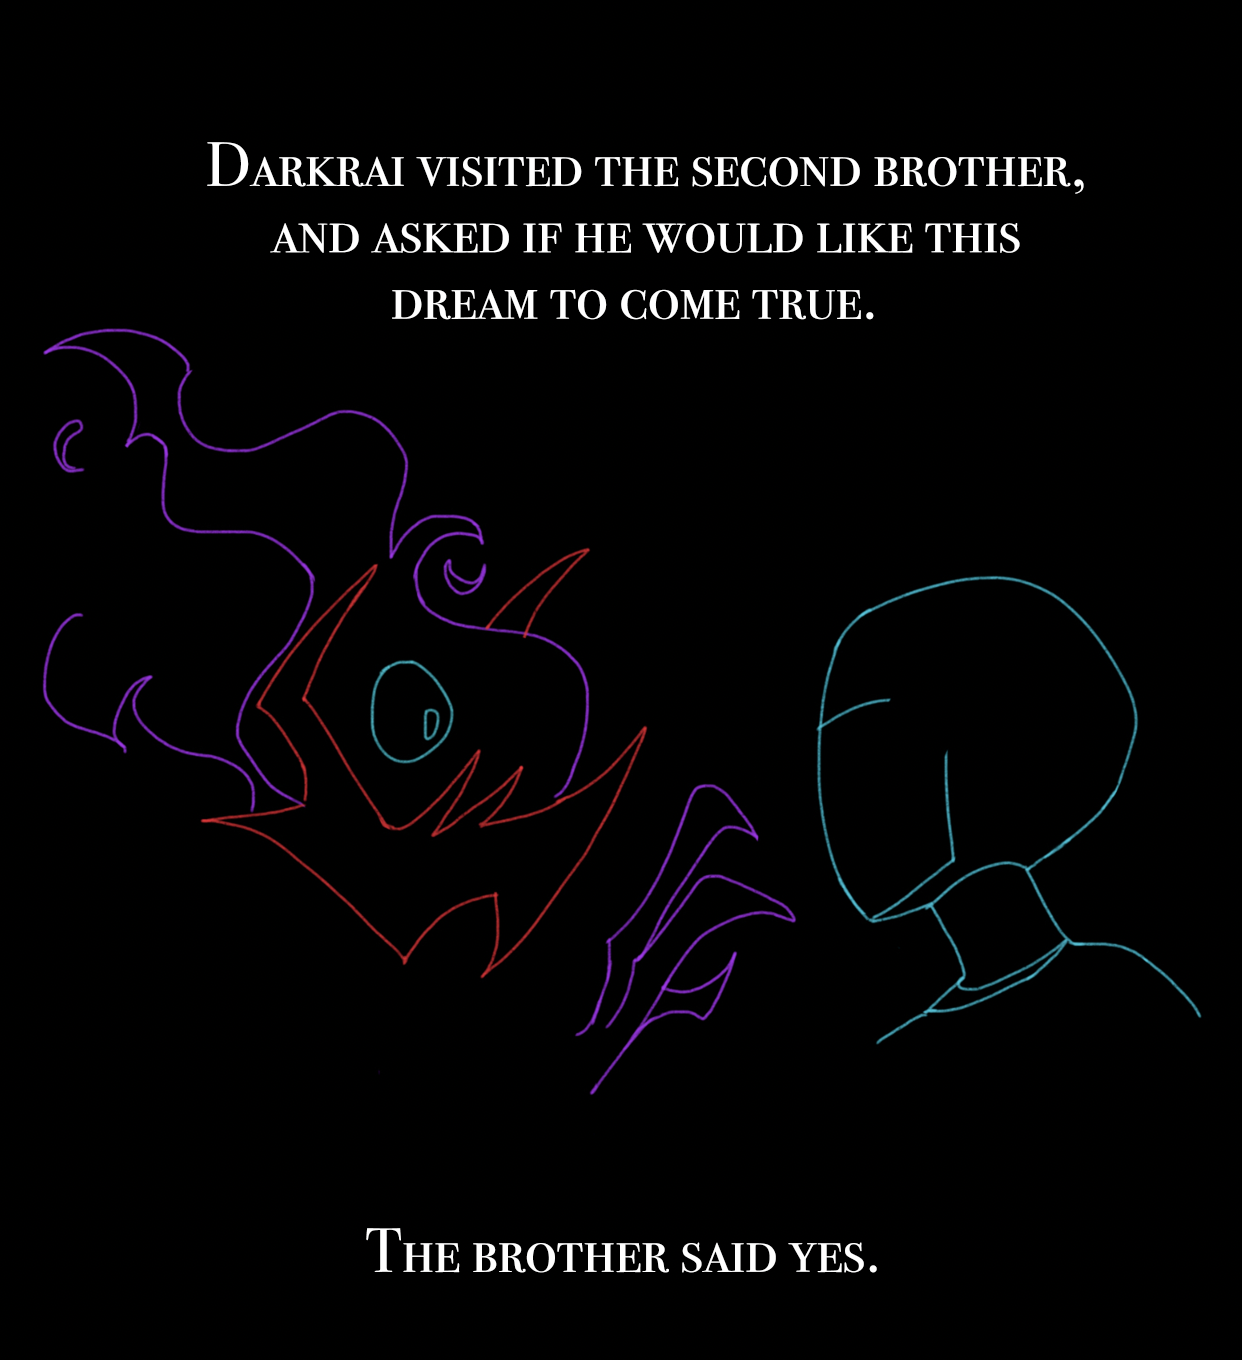 Darkrai visited the second brother, and asked if he would like this dream to come true. The brother said yes.